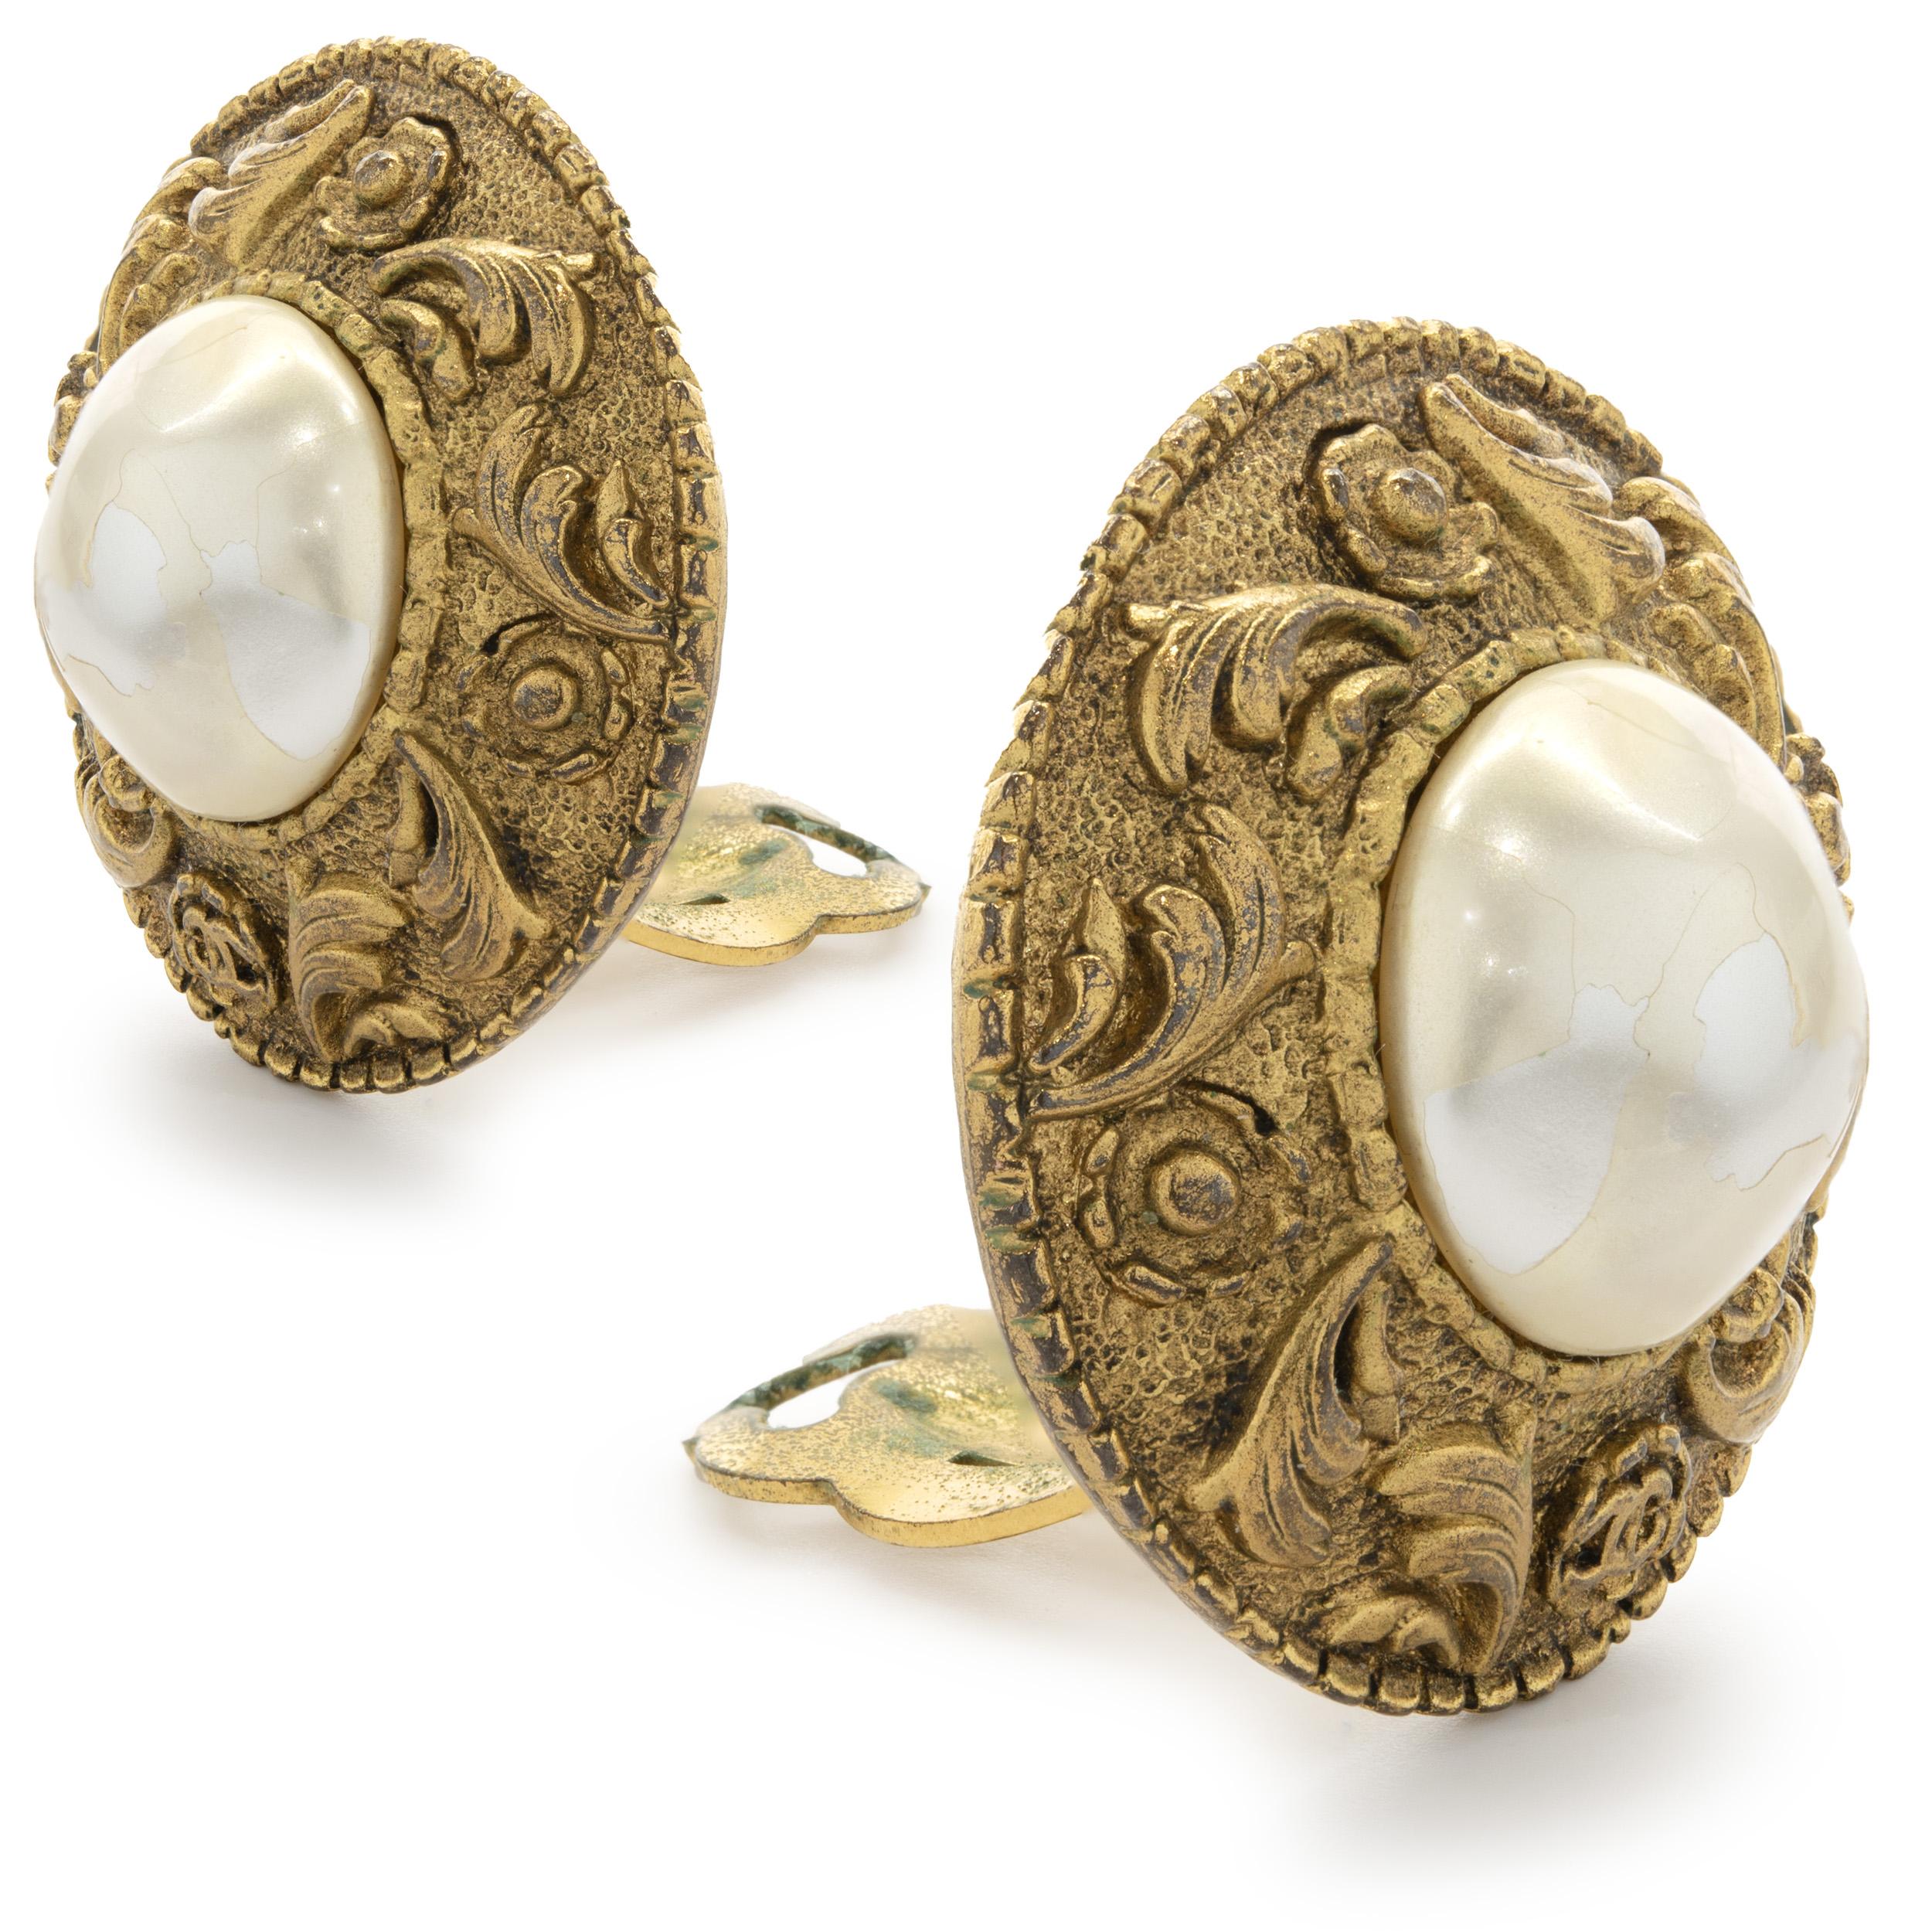 Designer: Chanel
Material: gold plated
Weight: 22.90 grams
Dimensions:  earrings measure 28.5mm wide